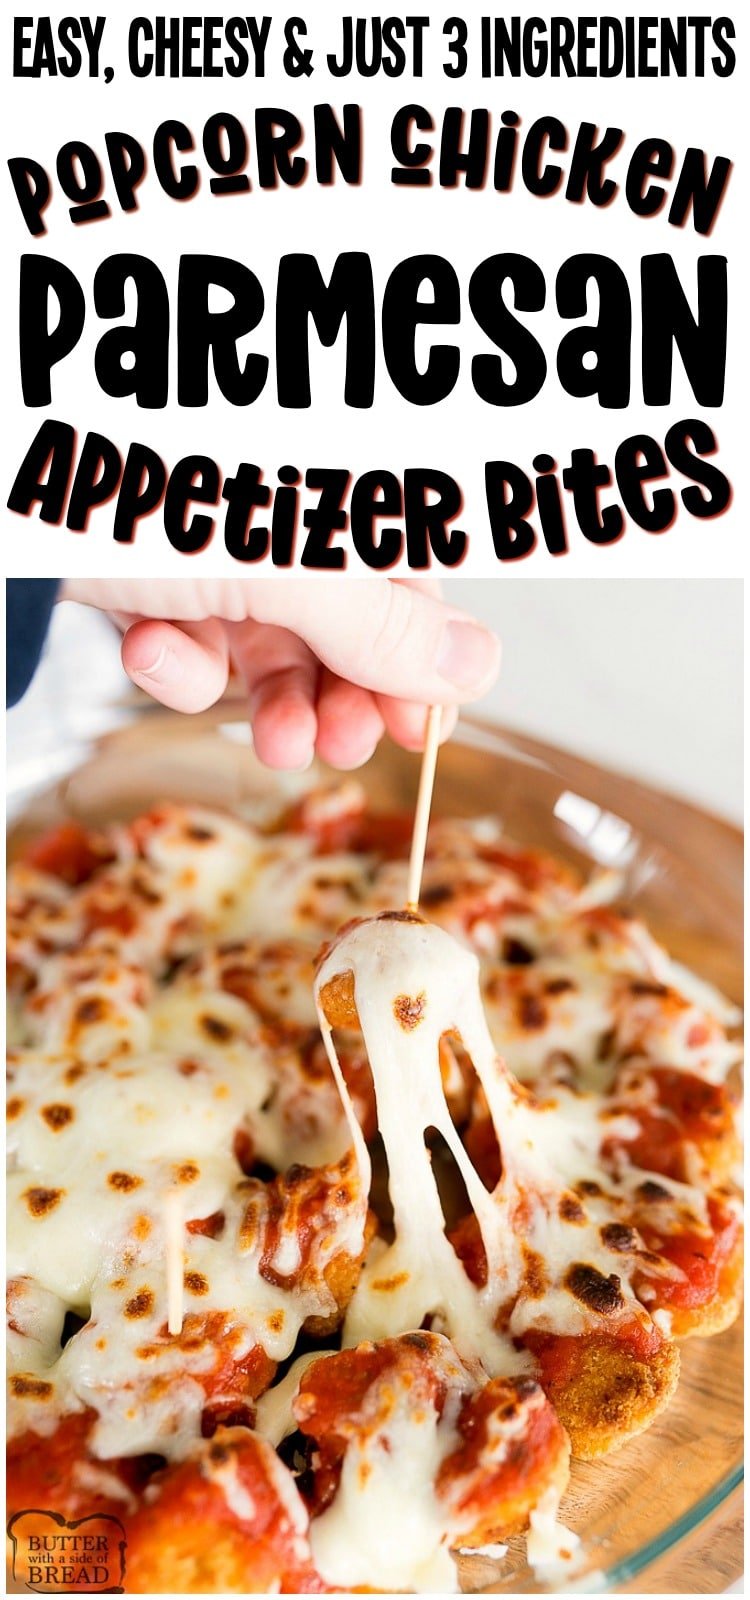 Chicken Parmesan Bites are a delicious appetizer perfect for the big game! With popcorn chicken, a little marinara sauce and mozzarella cheese, this pop-able appetizer couldn't be easier! #chicken #Parmesan #appetizer #gameday #chickenparm #cheese #easyappetizer from BUTTER WITH A SIDE OF BREAD